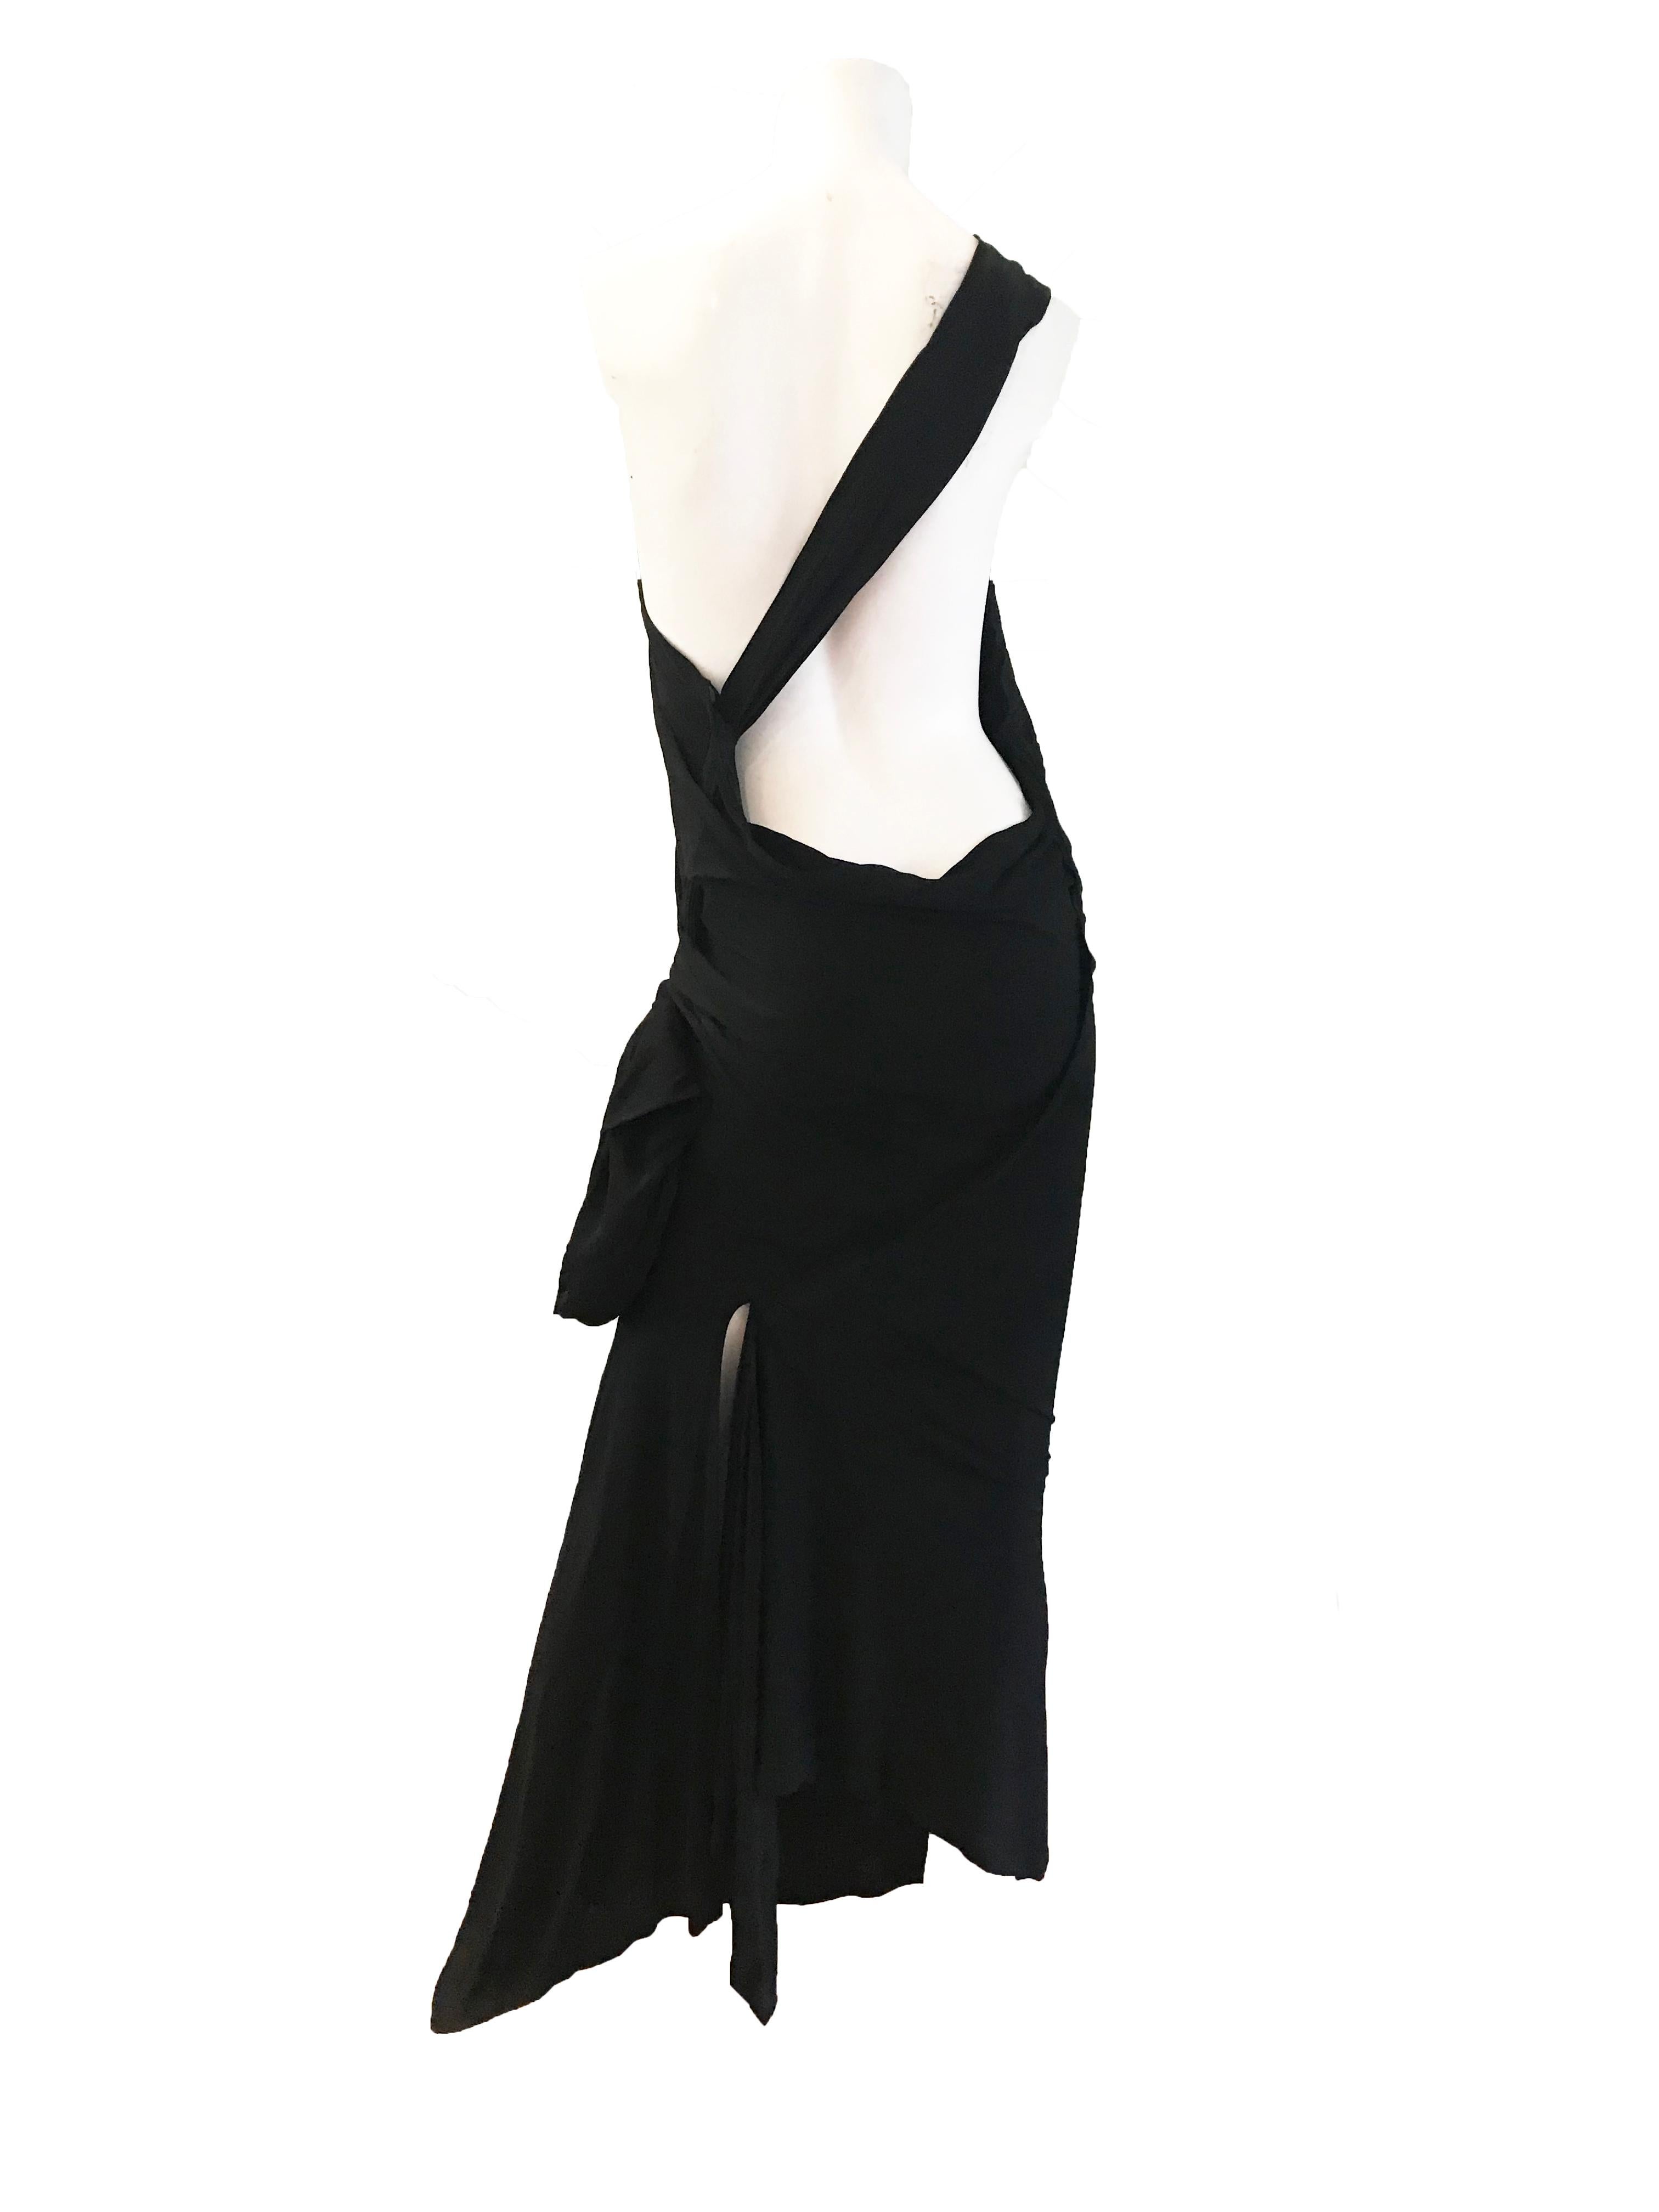 Black Jean Paul Gaultier black one shoulder gown with attached pouch For Sale